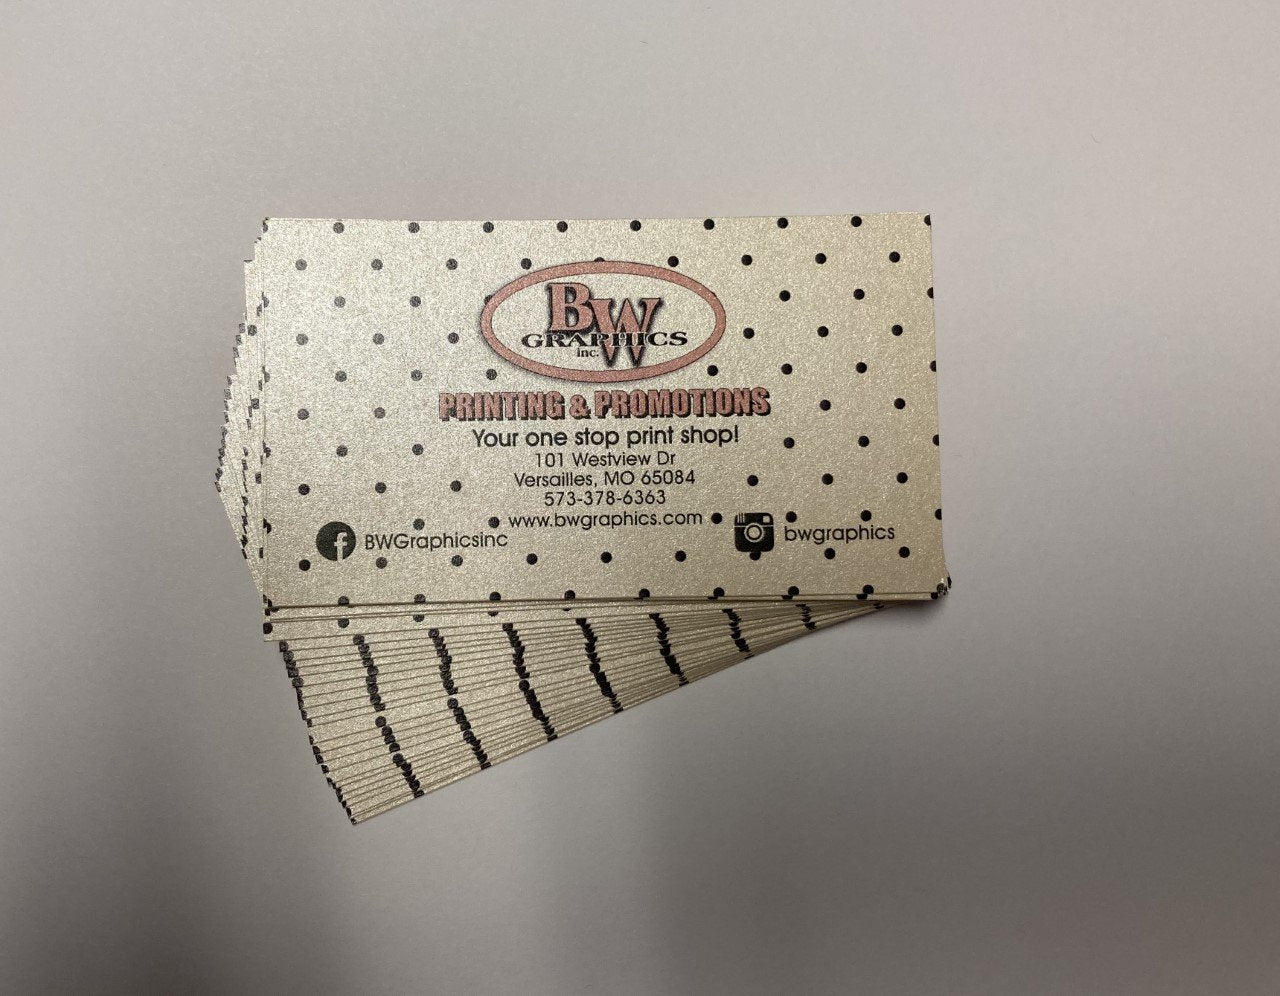 Pearl Business Cards